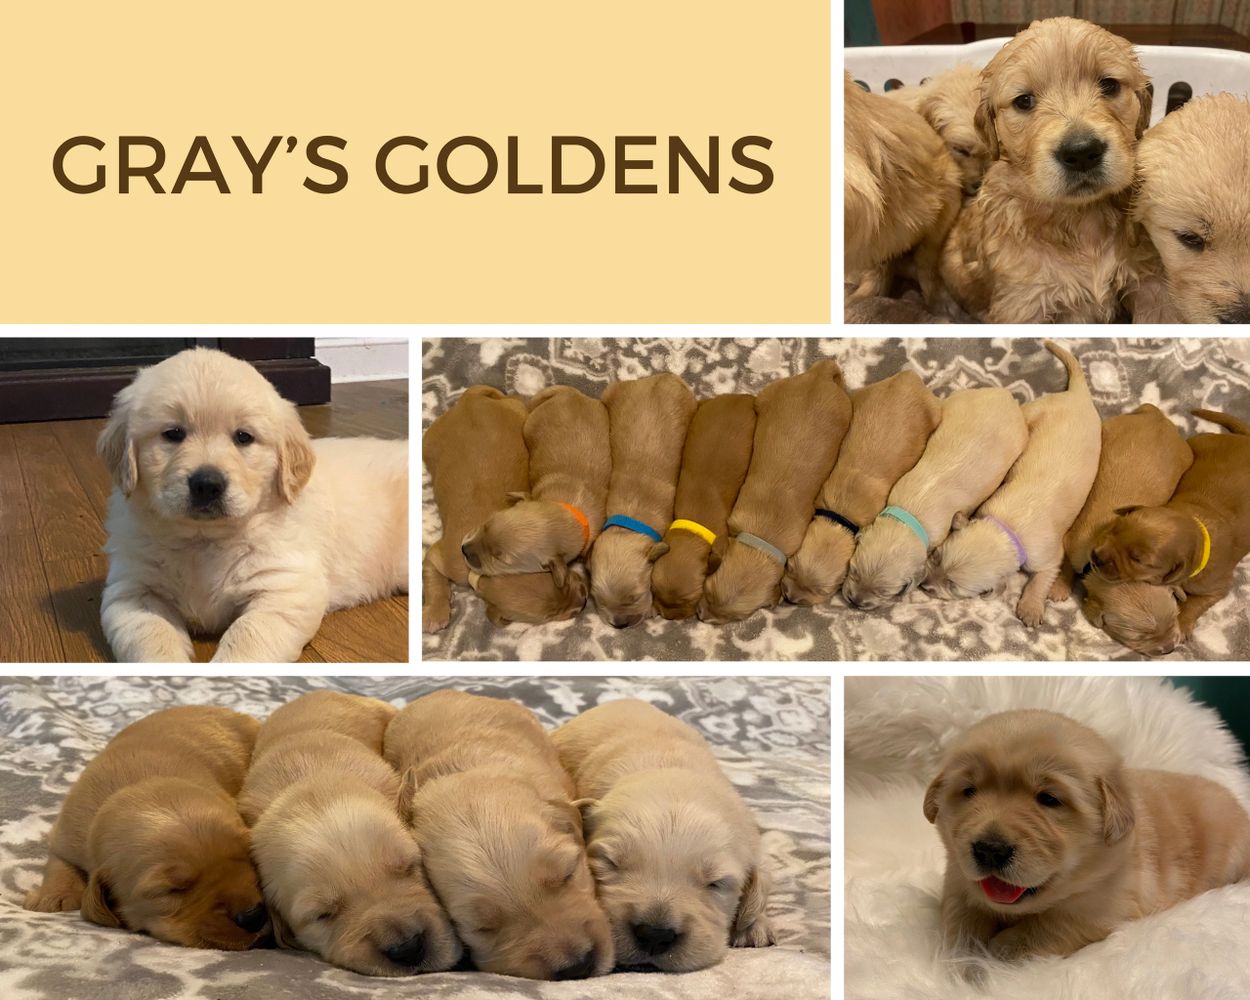 AKC Golden Retriever Puppies for sale in South Georgia. GA Golden pups dogs for sale by breeder.